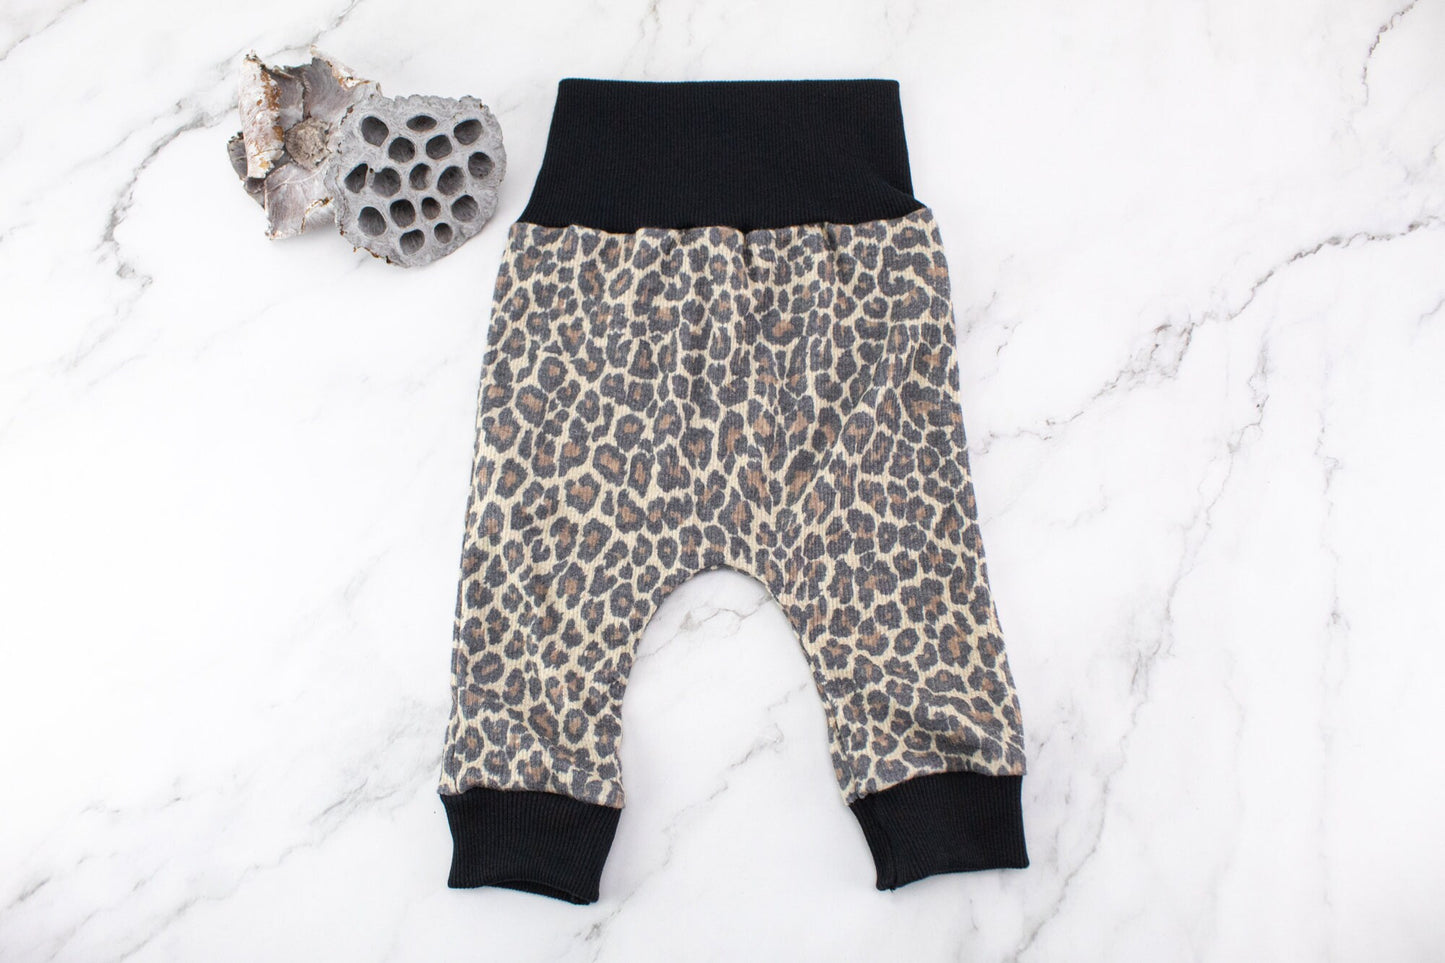 Brown Leopard Print Rib Knit Harem Pants with Wide Black Band 3-6 months or 12-18 months